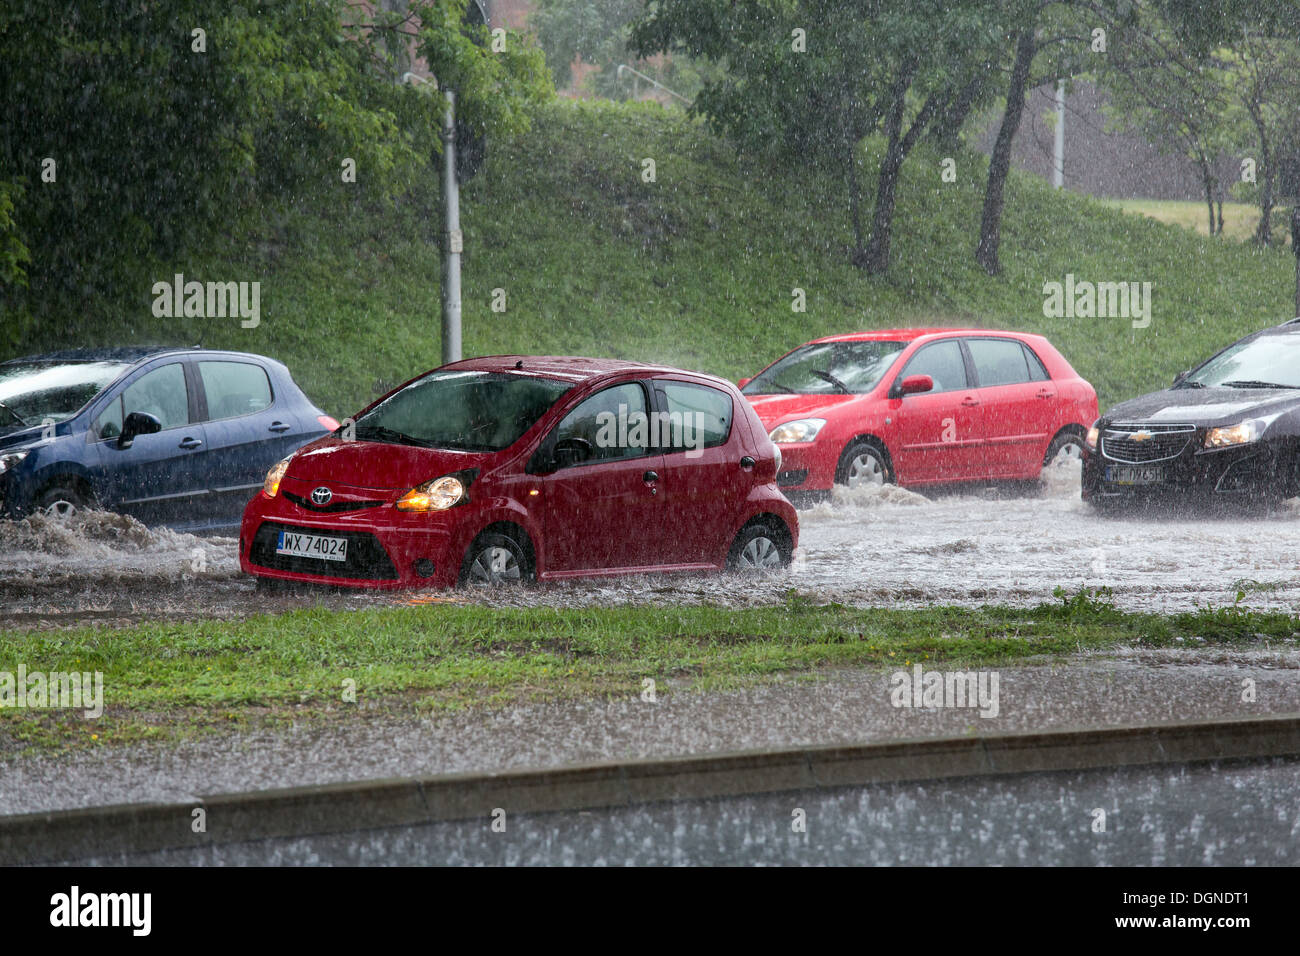 Warsaw, Poland, the road during a severe rainstorm Stock Photo